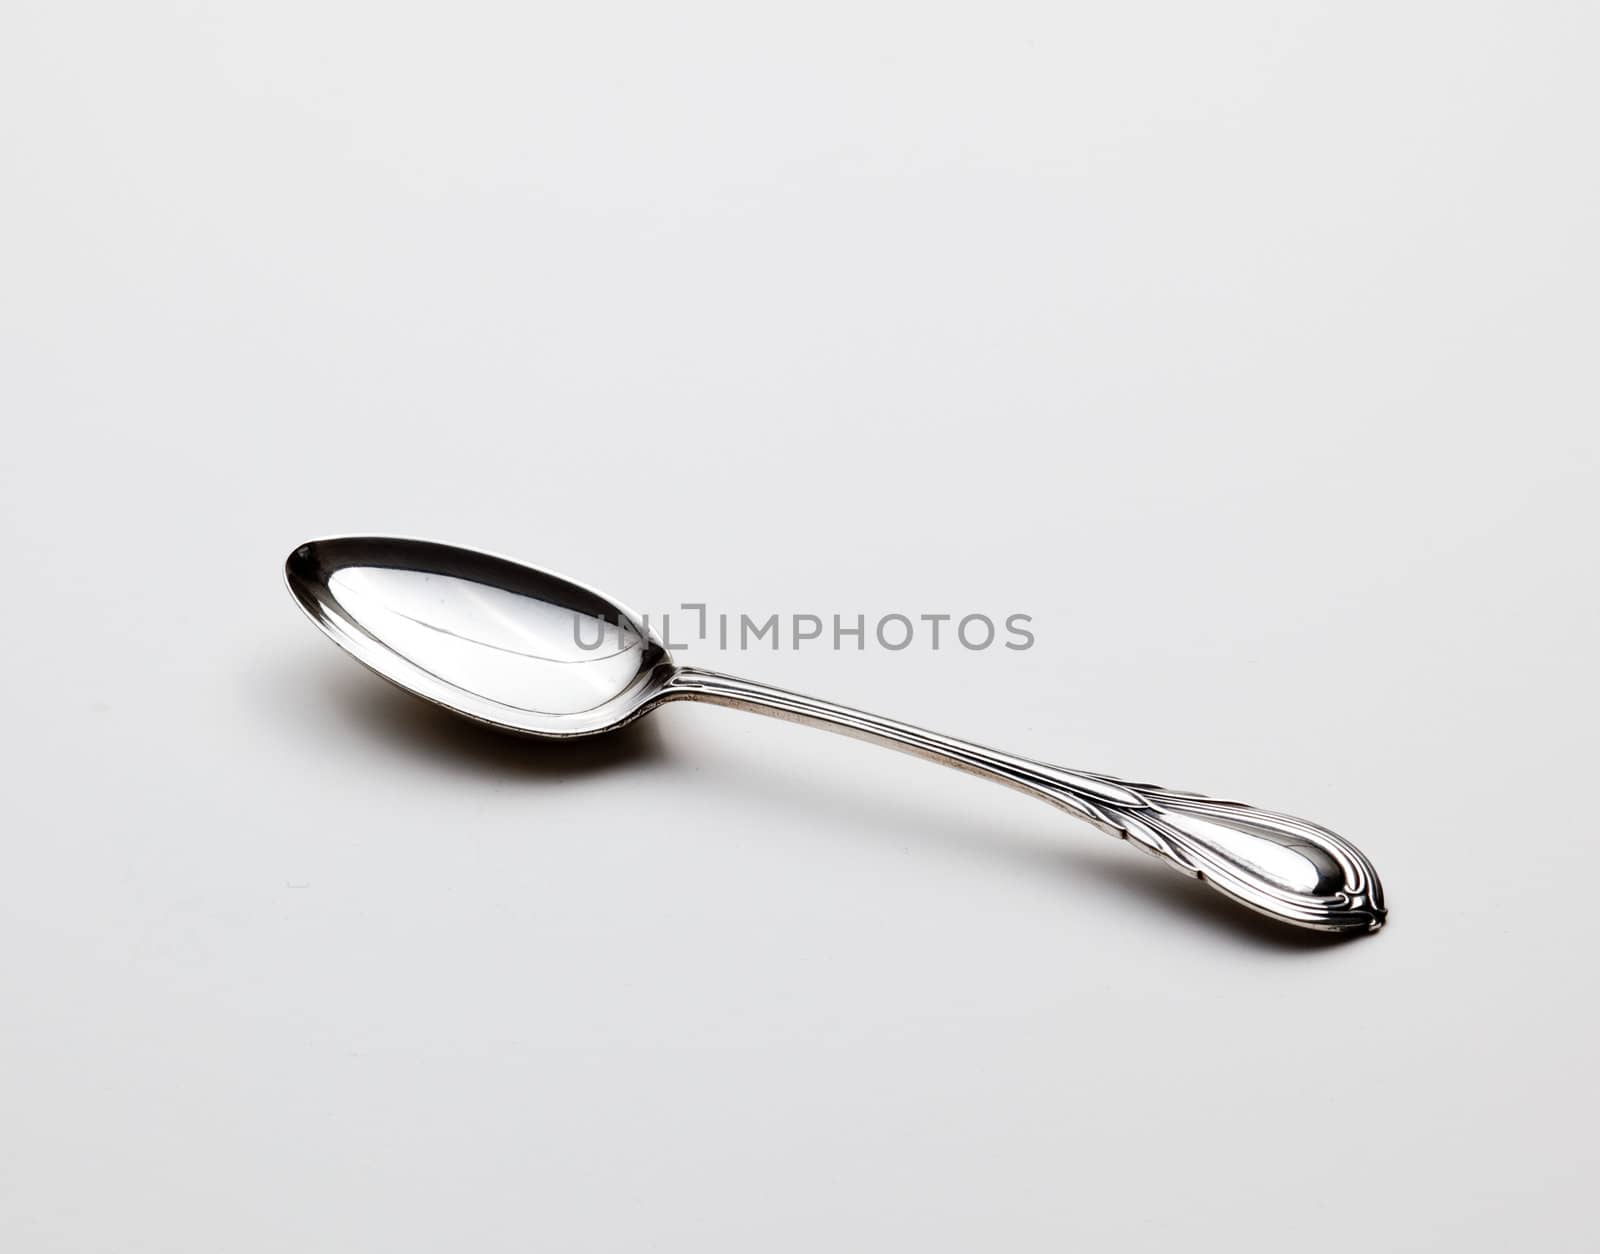 Old fashioned sterling silver object tea spoon or dessert spoon